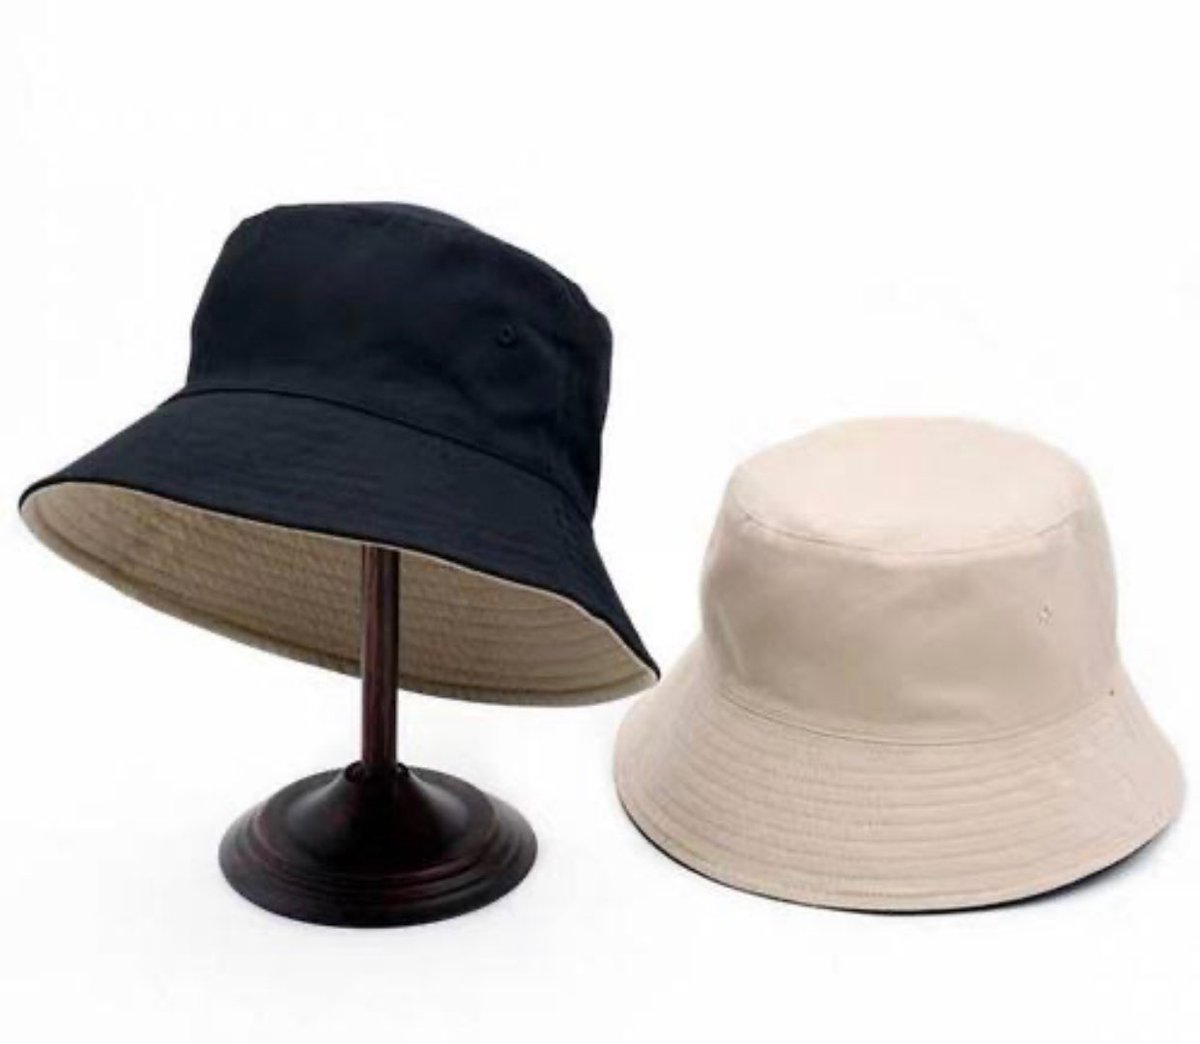 Casual Collor Fabric Plain Bucket Hat 
#mensfashion  #beautiful #stylish #beauty #shirt #look #art #tshirts #sale #jeans #clothesforsale #boutique #women #fashiongram #trendy #photography #instastyle #trending #girl #accessories #outfits #girls #clothingline #cute #lifestyle